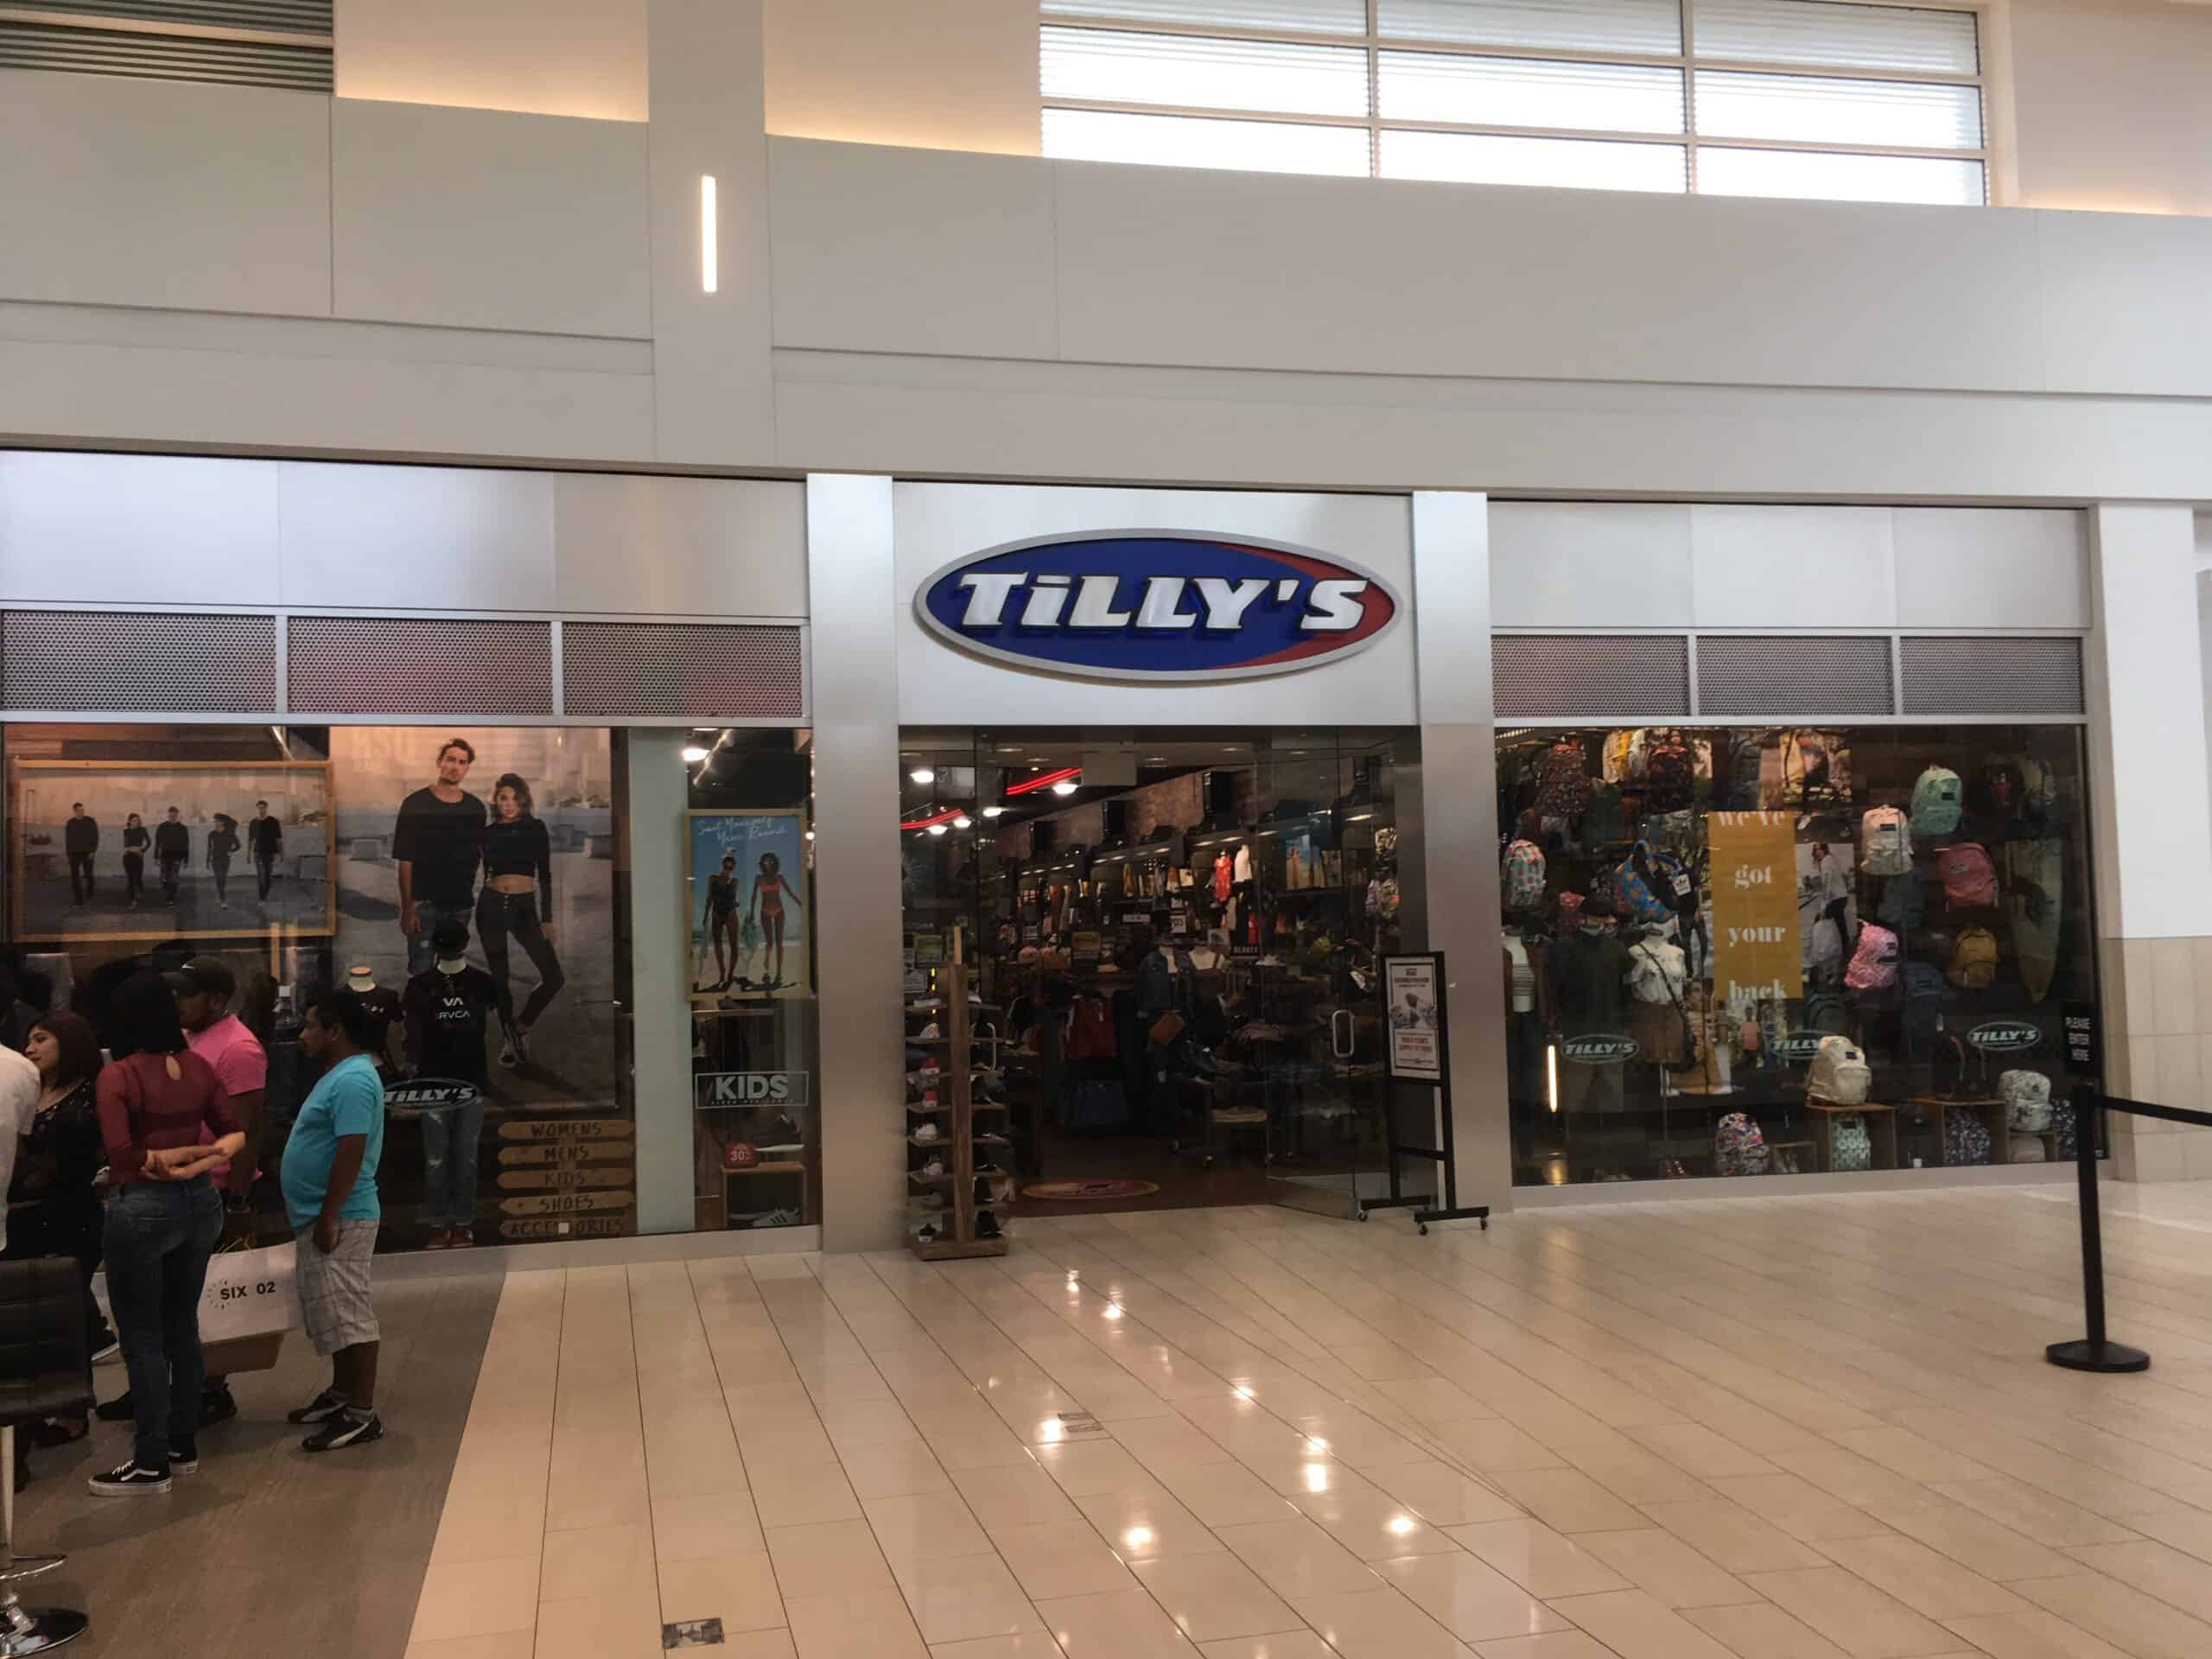 Tillys in The Florida Mall by Dough8472